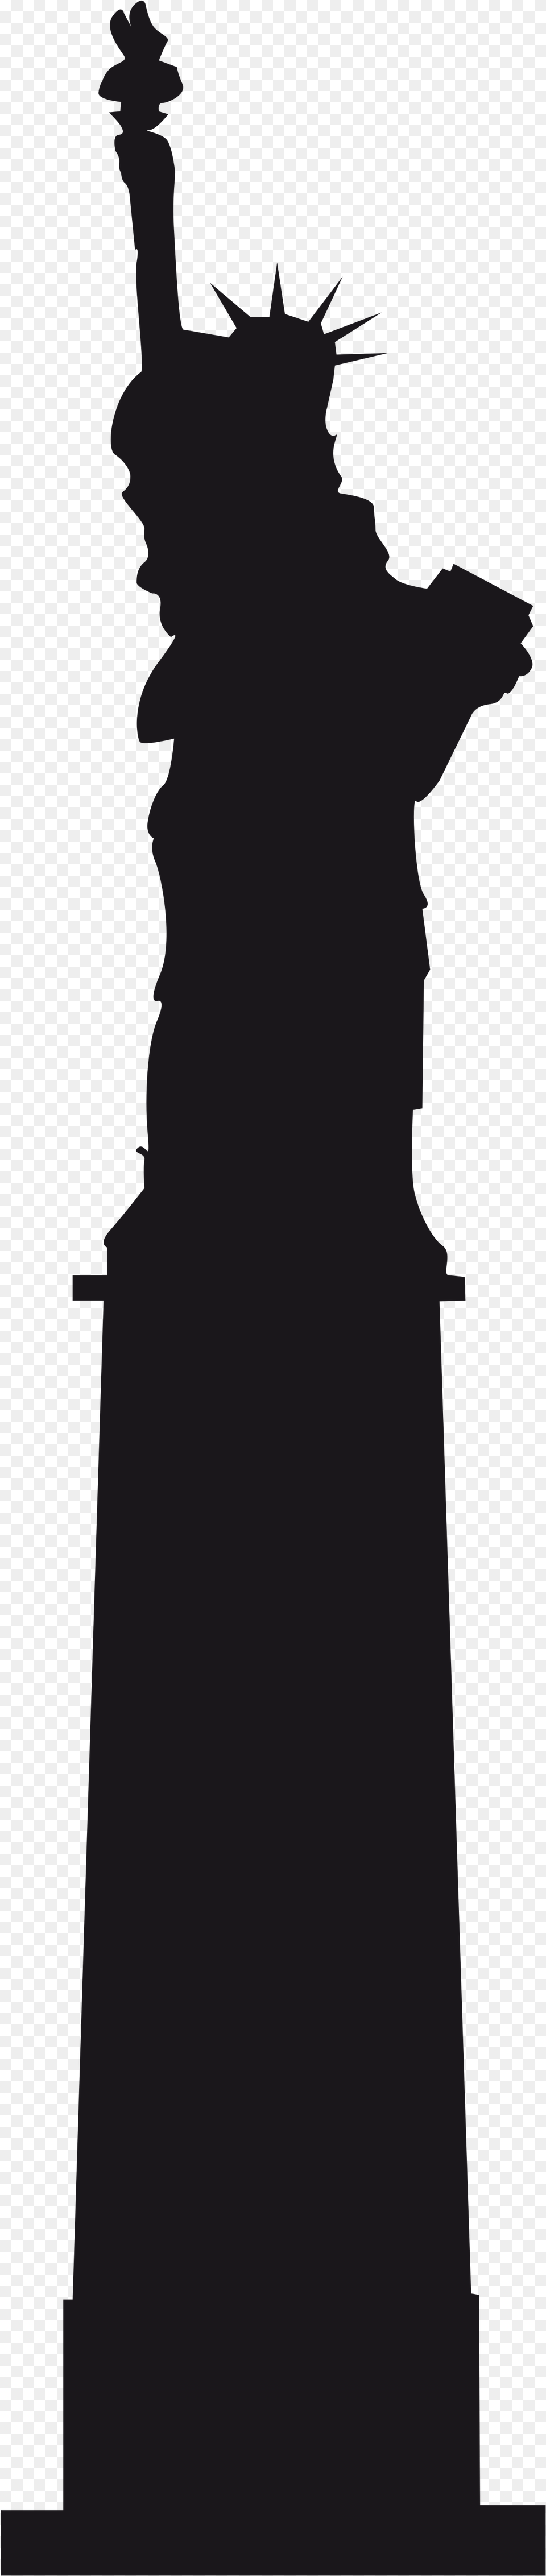 Statue Of Liberty Silhouette Statue Of Liberty, Clothing, Dress, Formal Wear, Wedding Free Transparent Png